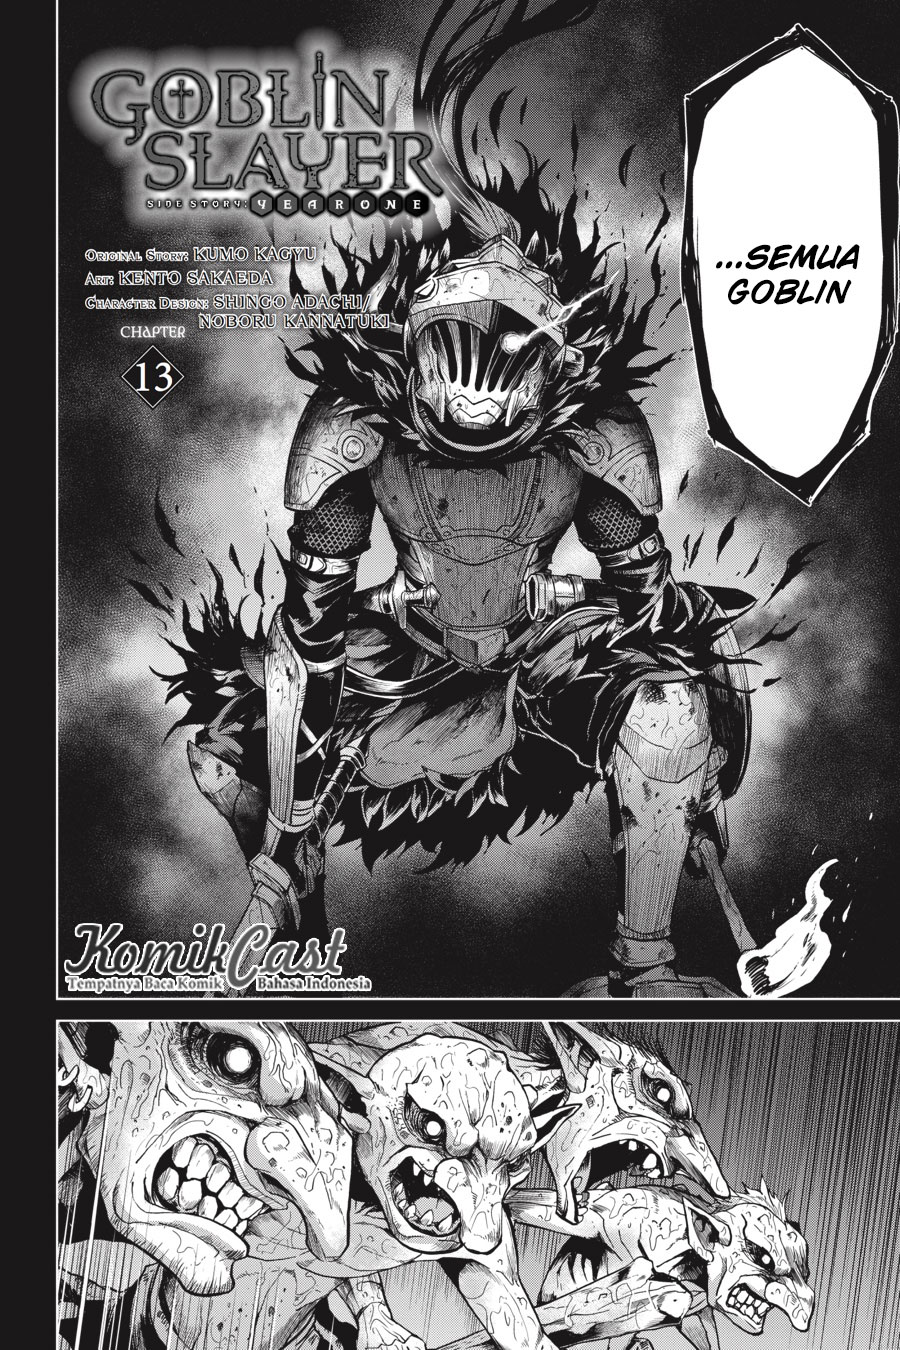 Goblin Slayer: Side Story Year One Chapter 13